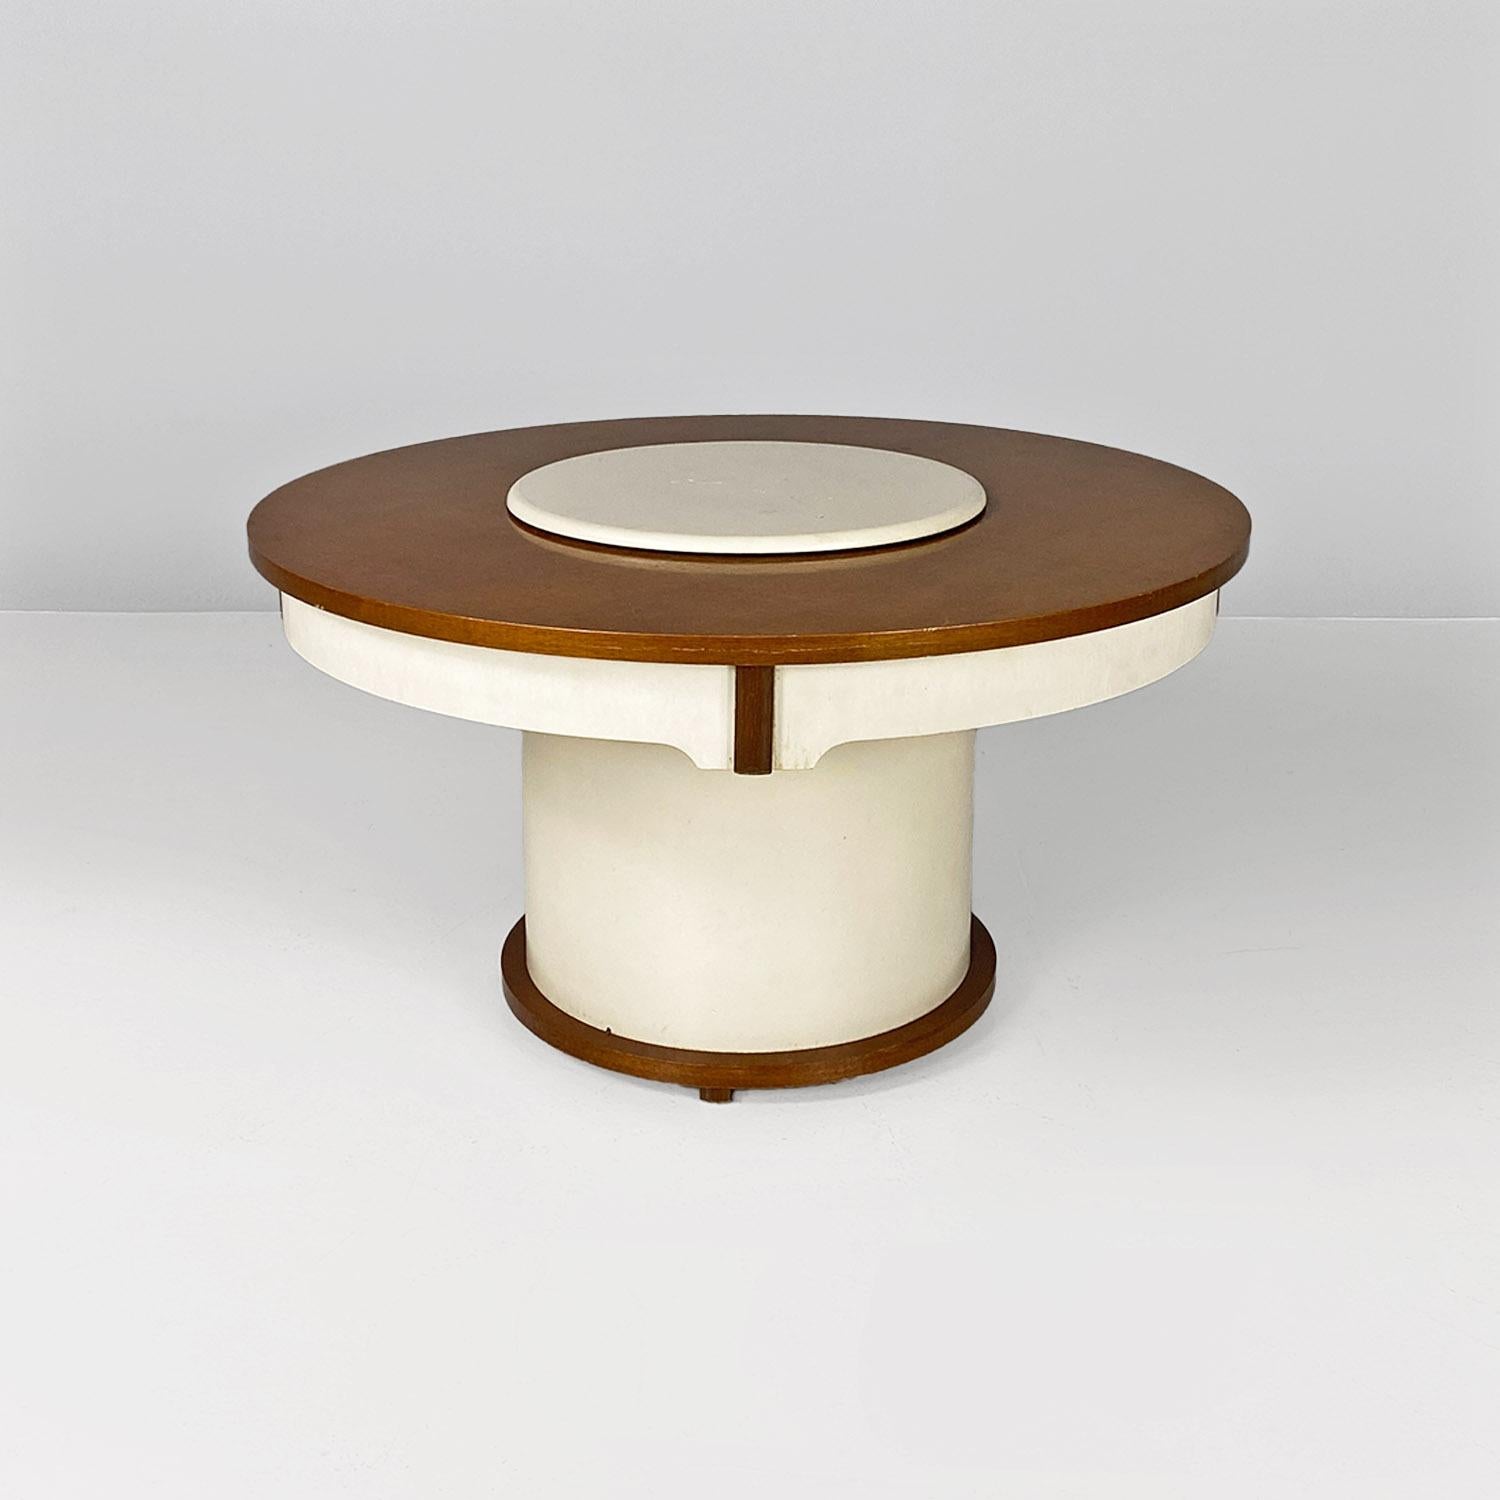 Coffee table, also known as Gervasino table, with wooden frame in natural color, with parts painted white. The white disk placed in the center of the top hides a bar storage compartment, which comes up automatically by moving a metal lever, located